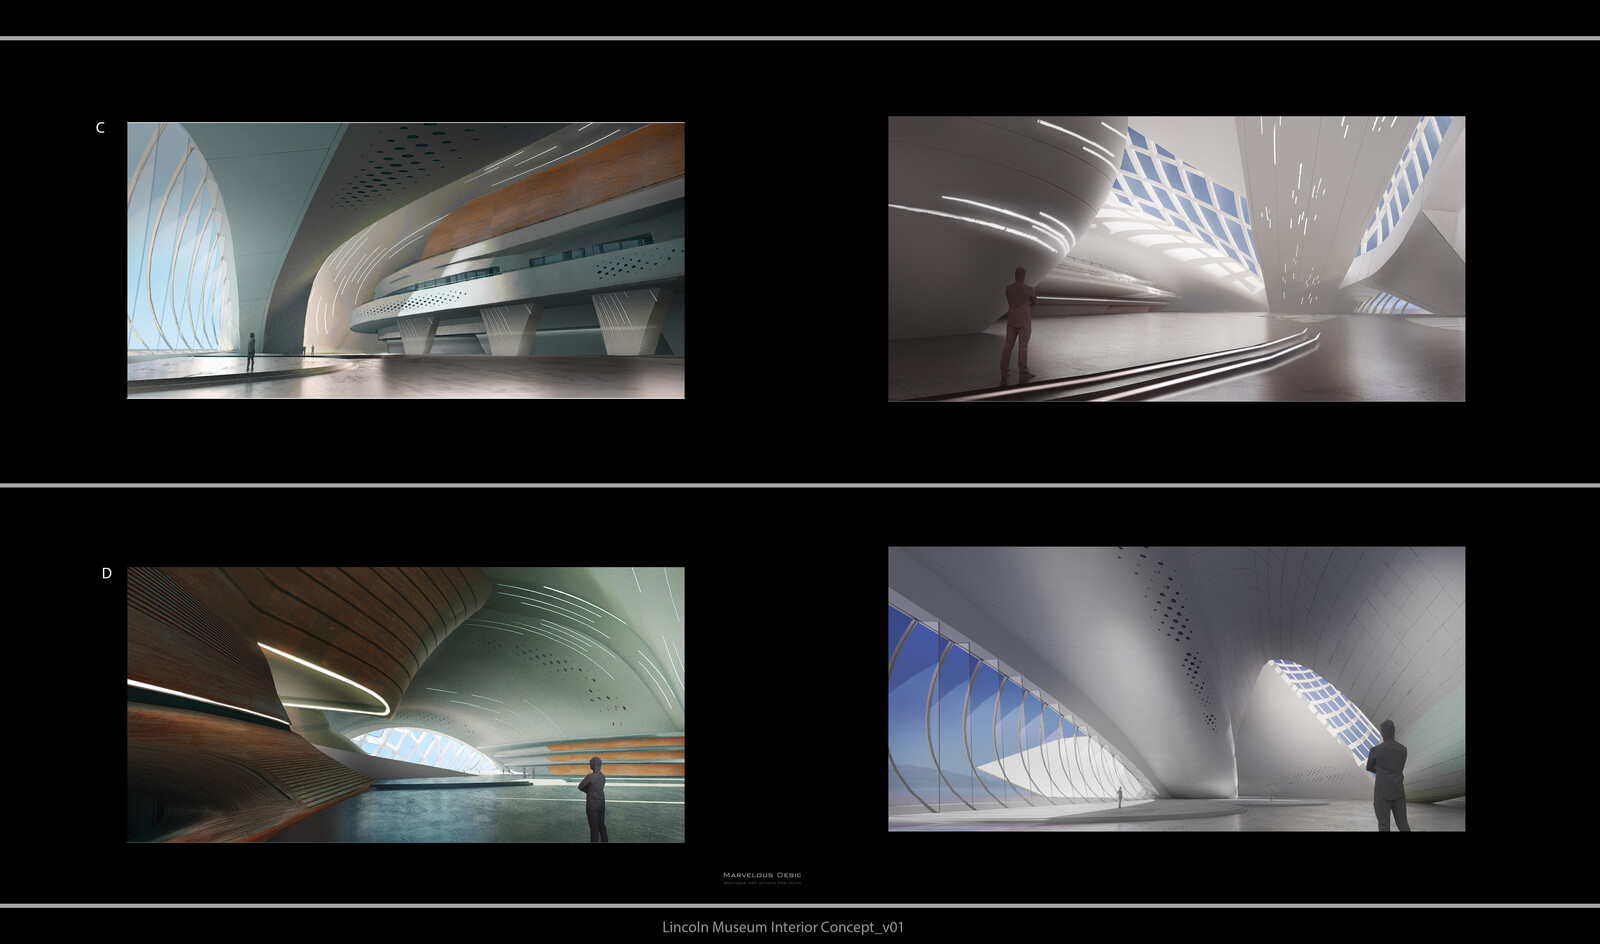 Some of the final designs of the Space.
Scroll down for more detailed steps. 